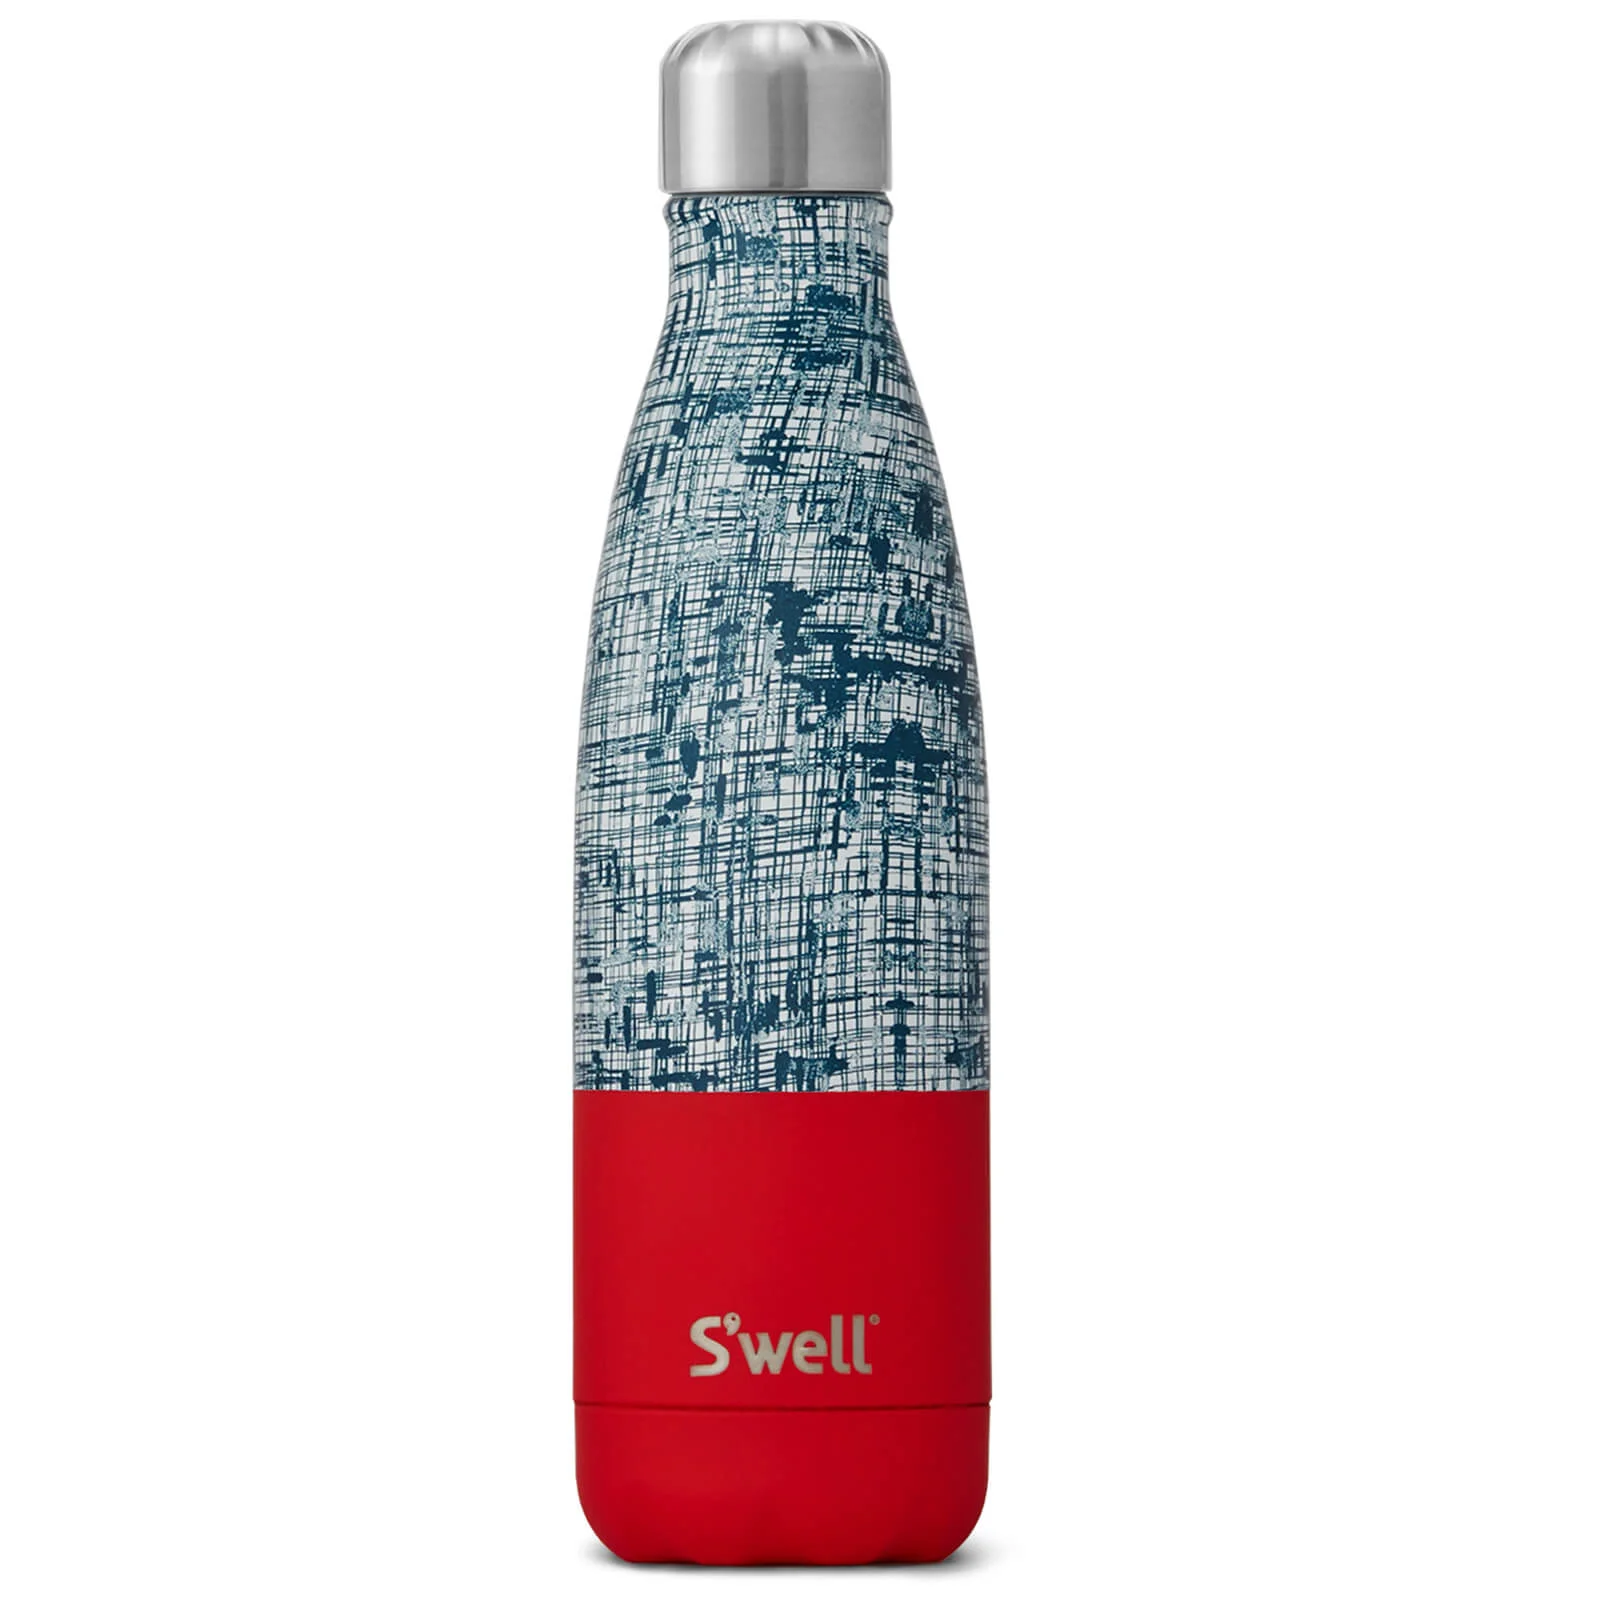 S'well Offshore Water Bottle 500ml Image 1